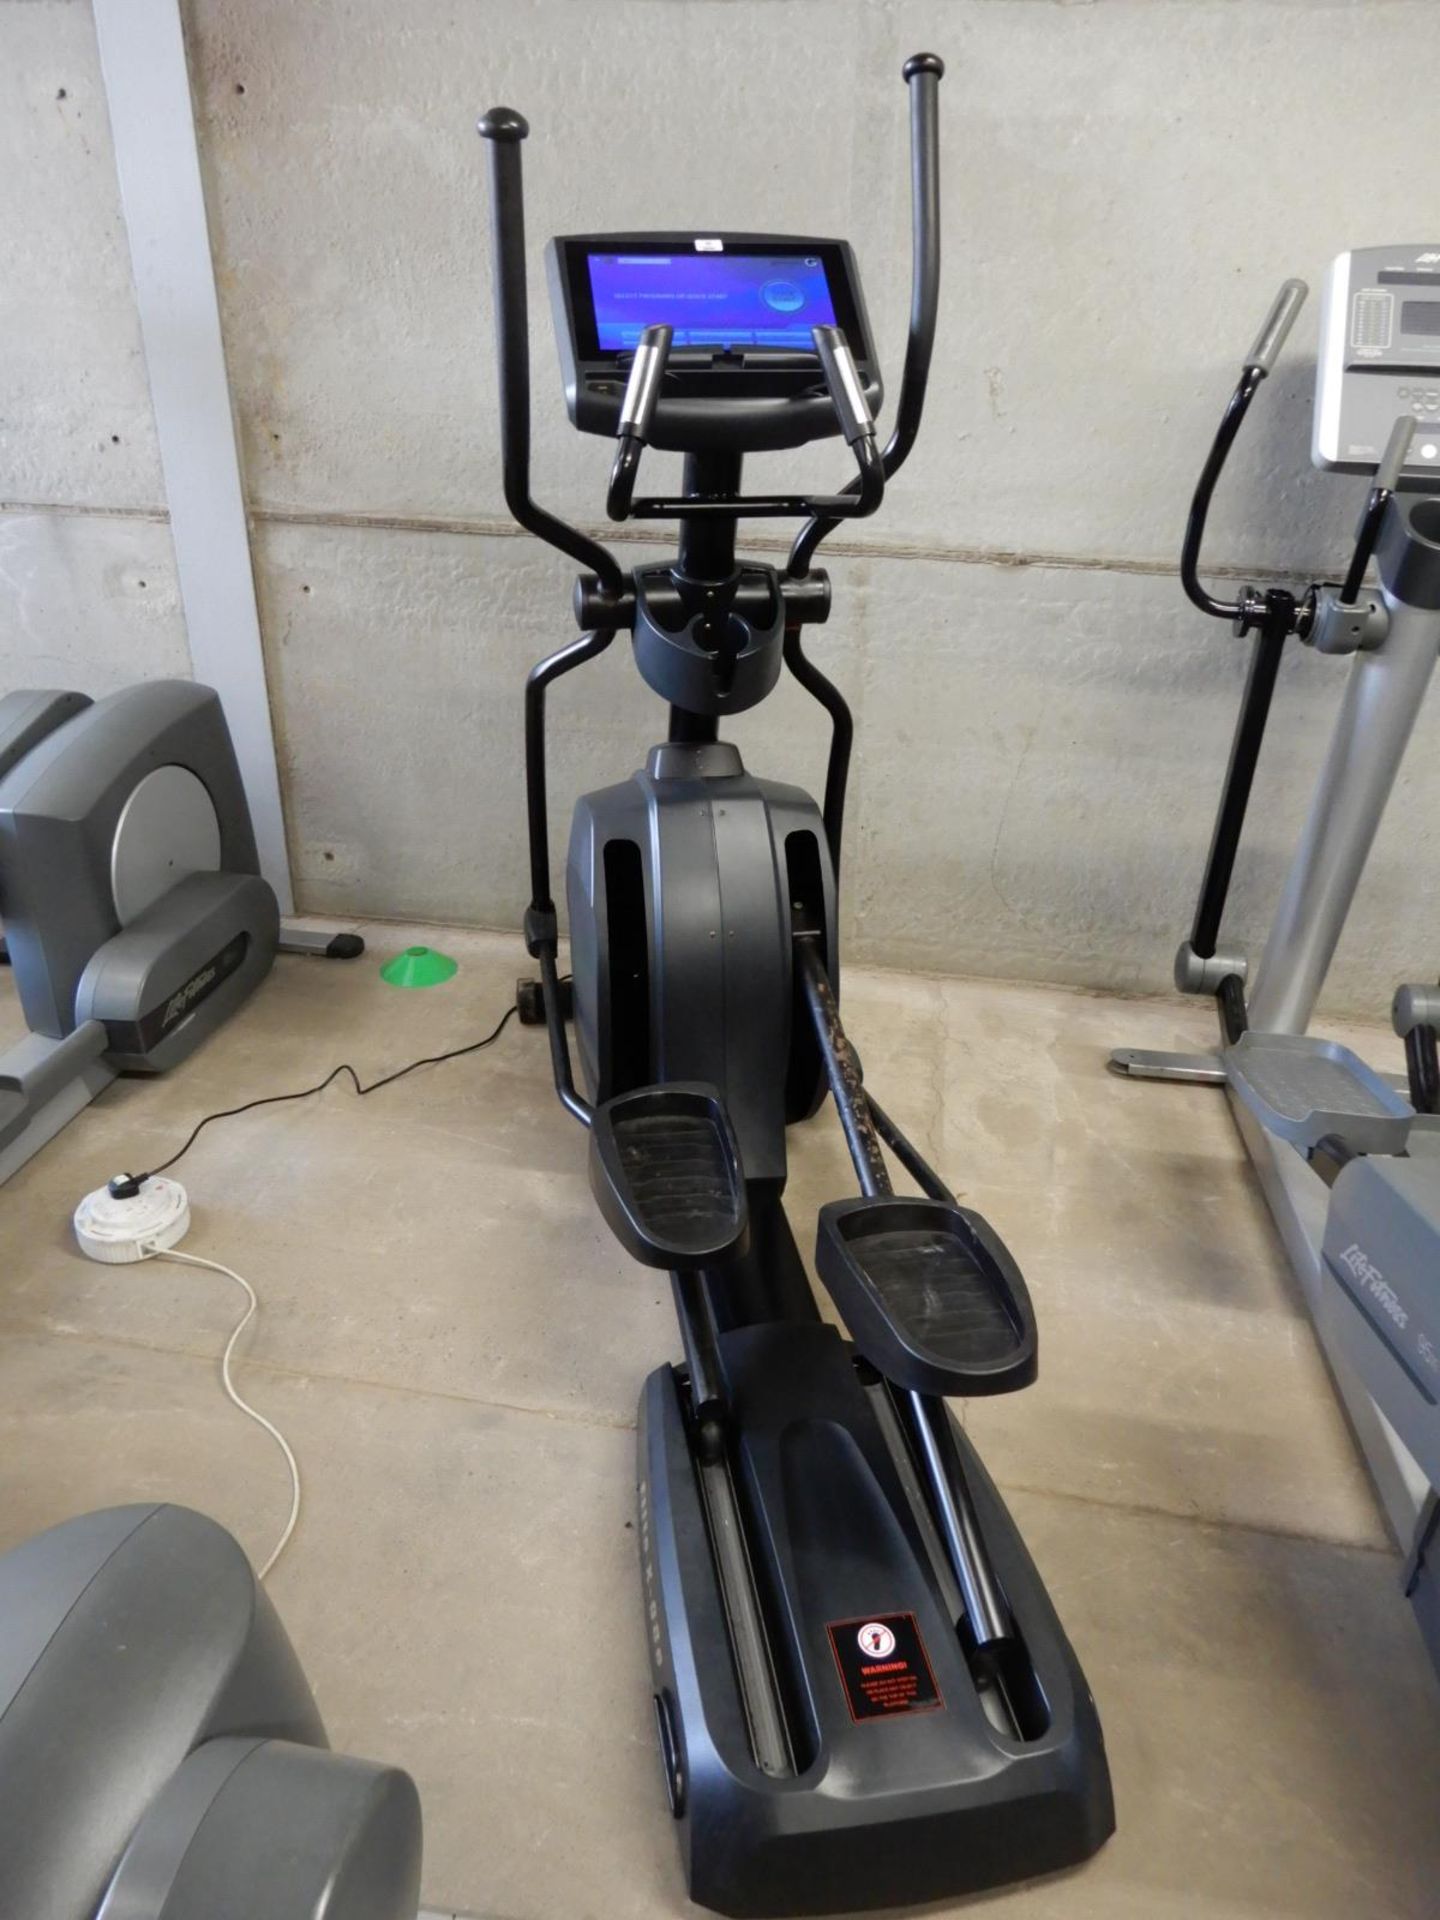 *Gym Gear Elite X-90E Elliptical Cross Trainer with Touchscreen Display